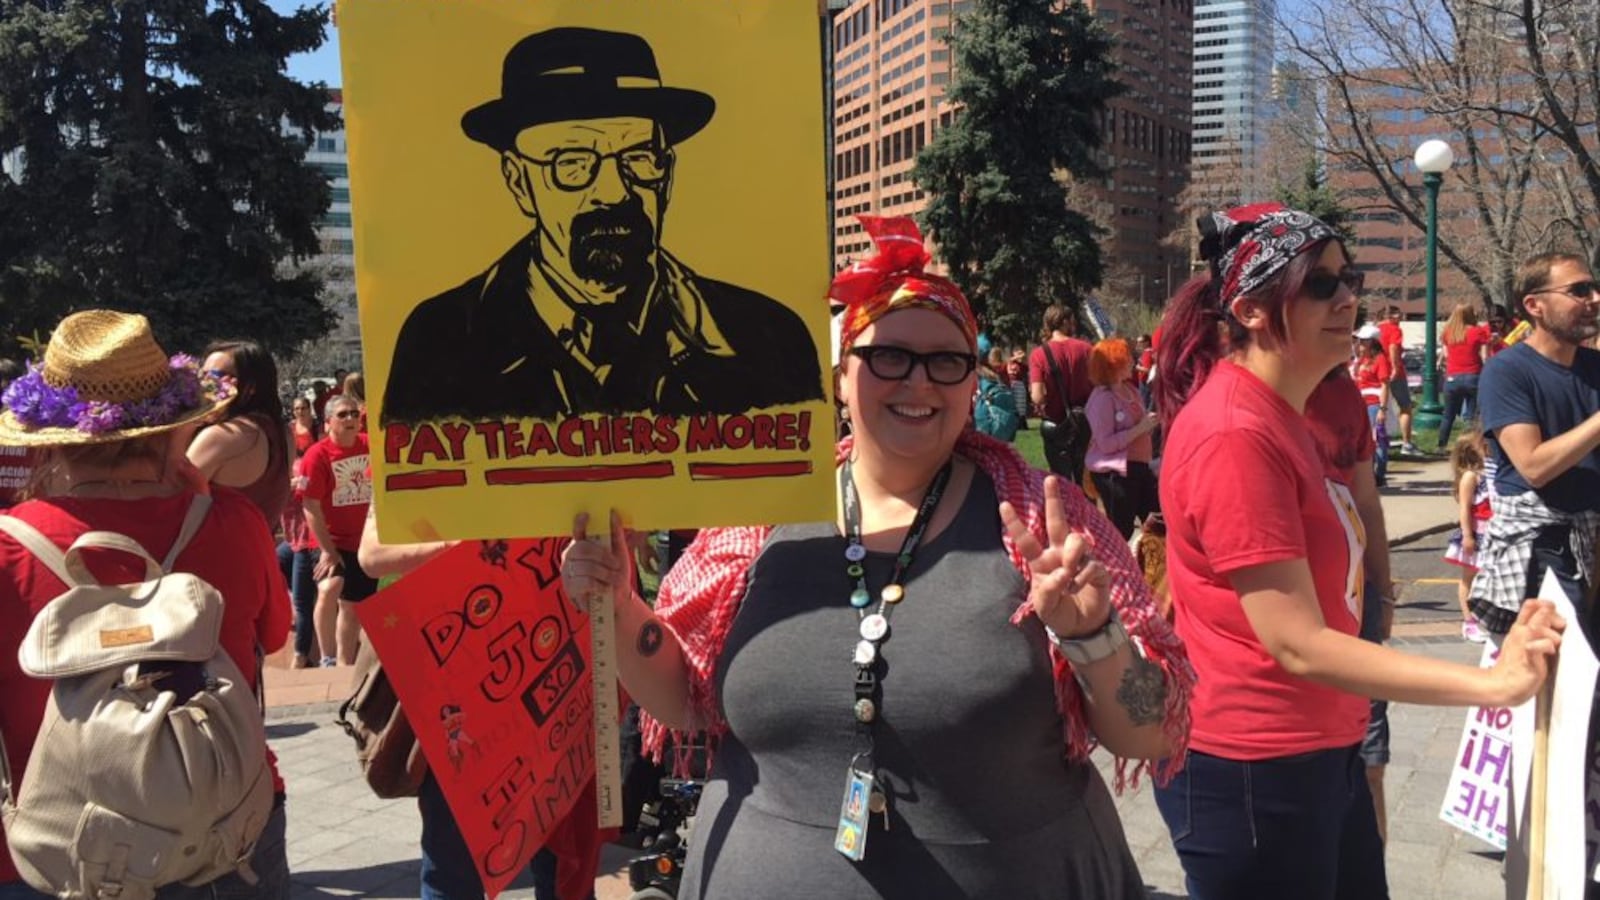 Thousands of Colorado teachers protested for more education funding in April. What will voters say in November?